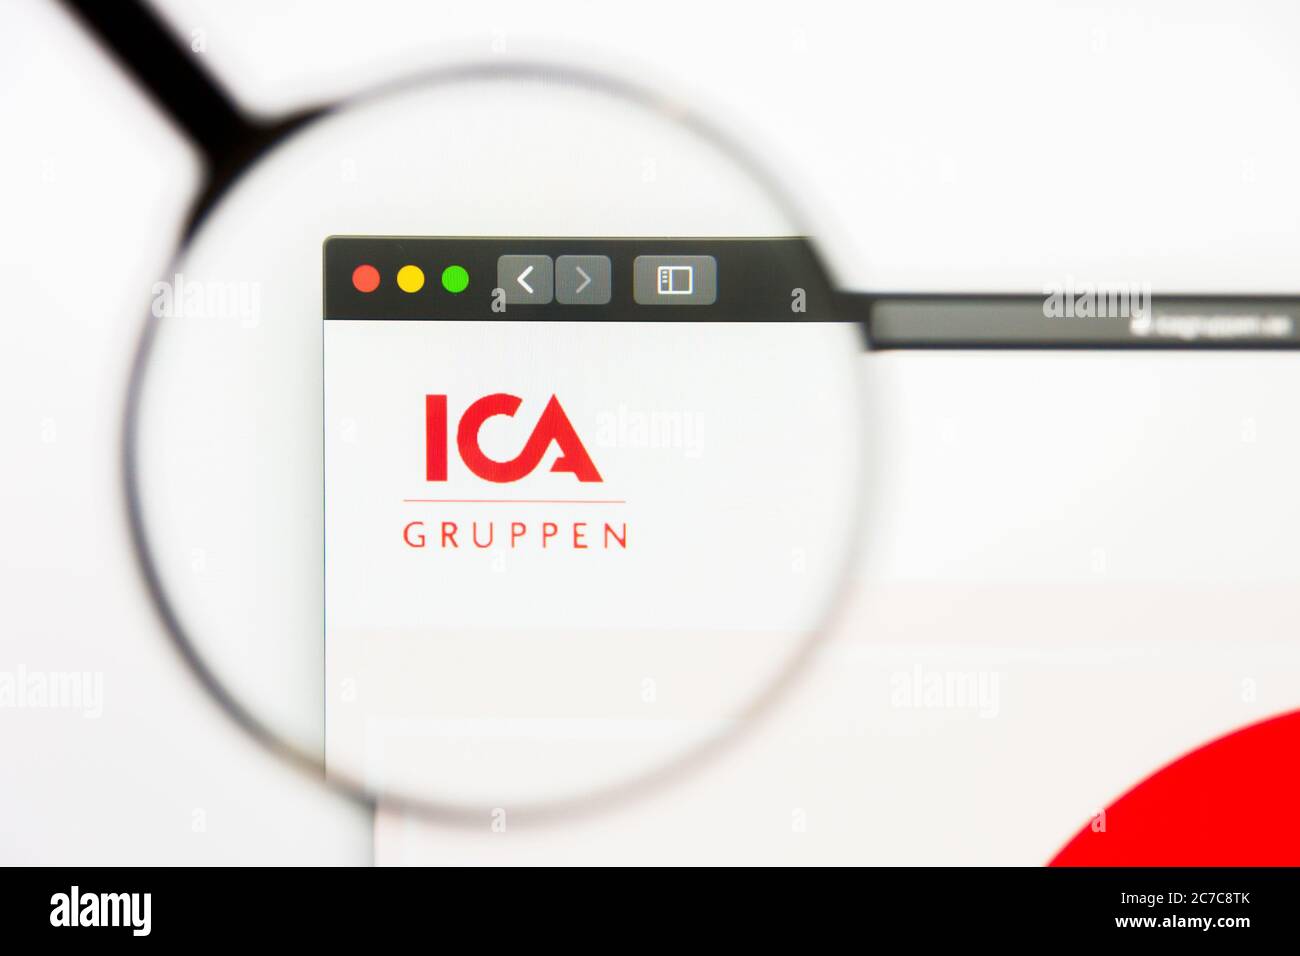 Los Angeles, California, USA - 13 March 2019: Illustrative Editorial, ICA Gruppen website homepage. ICA Gruppen logo visible on display screen Stock Photo